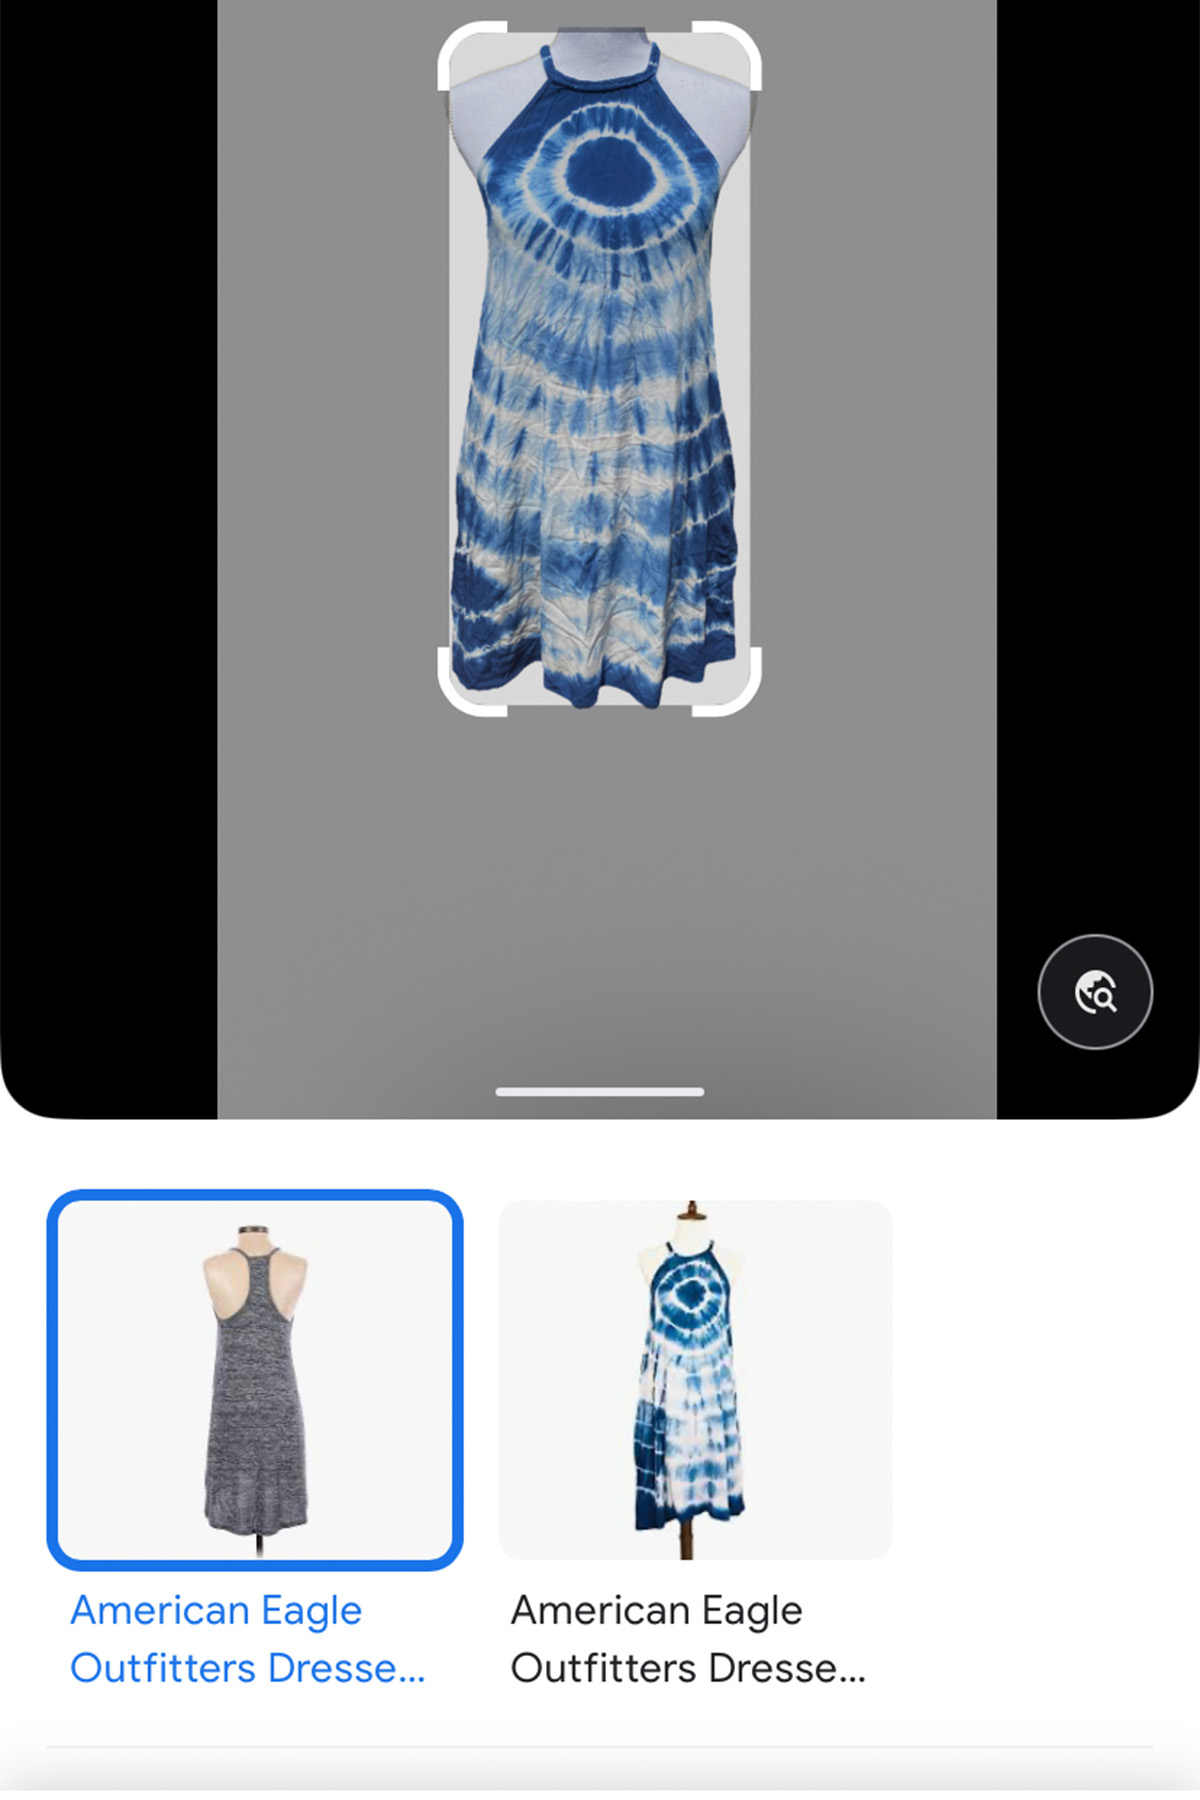 an american eagle blue and white tie dye dress google reverse image search.